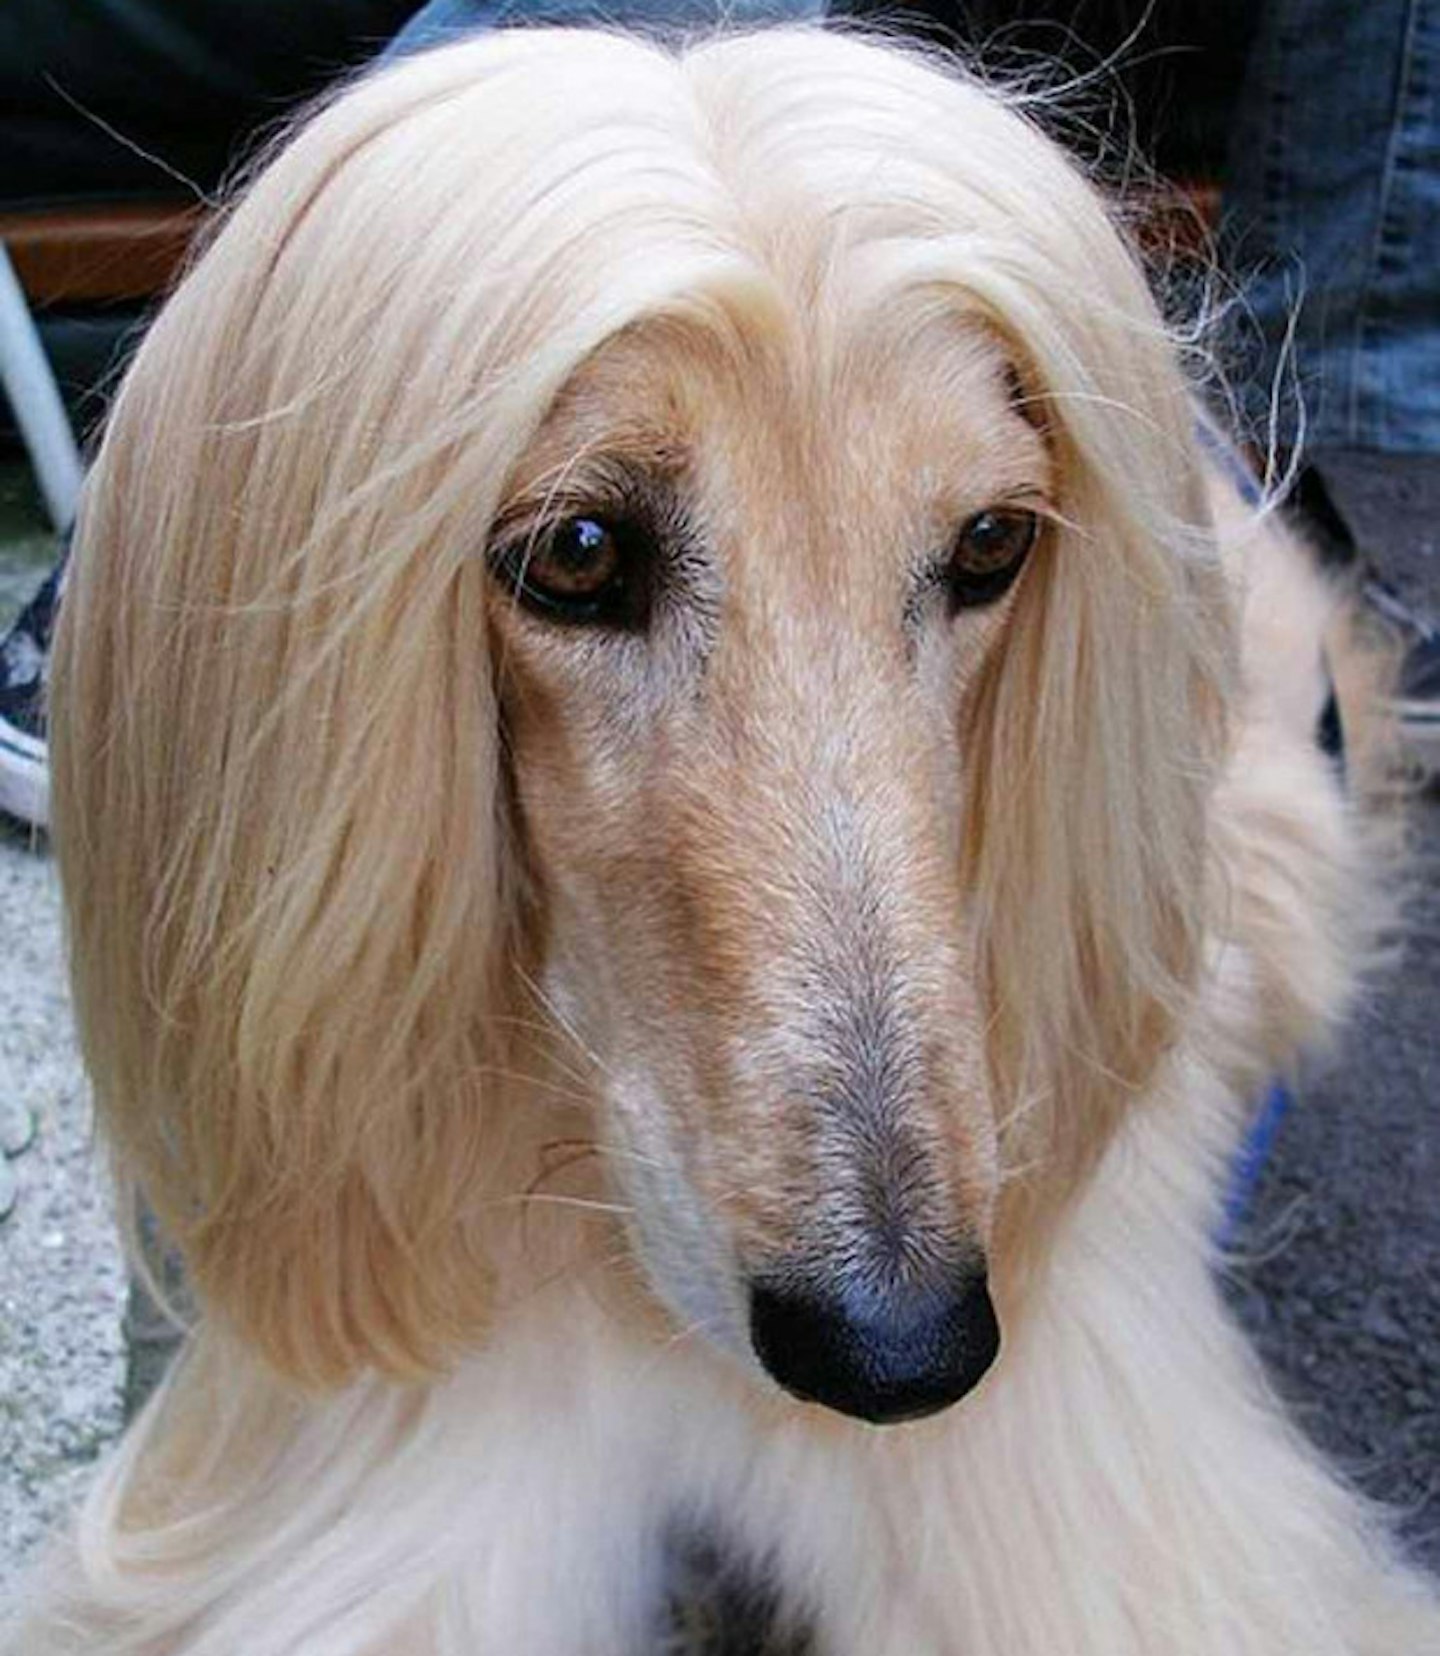 This Afghan Hound